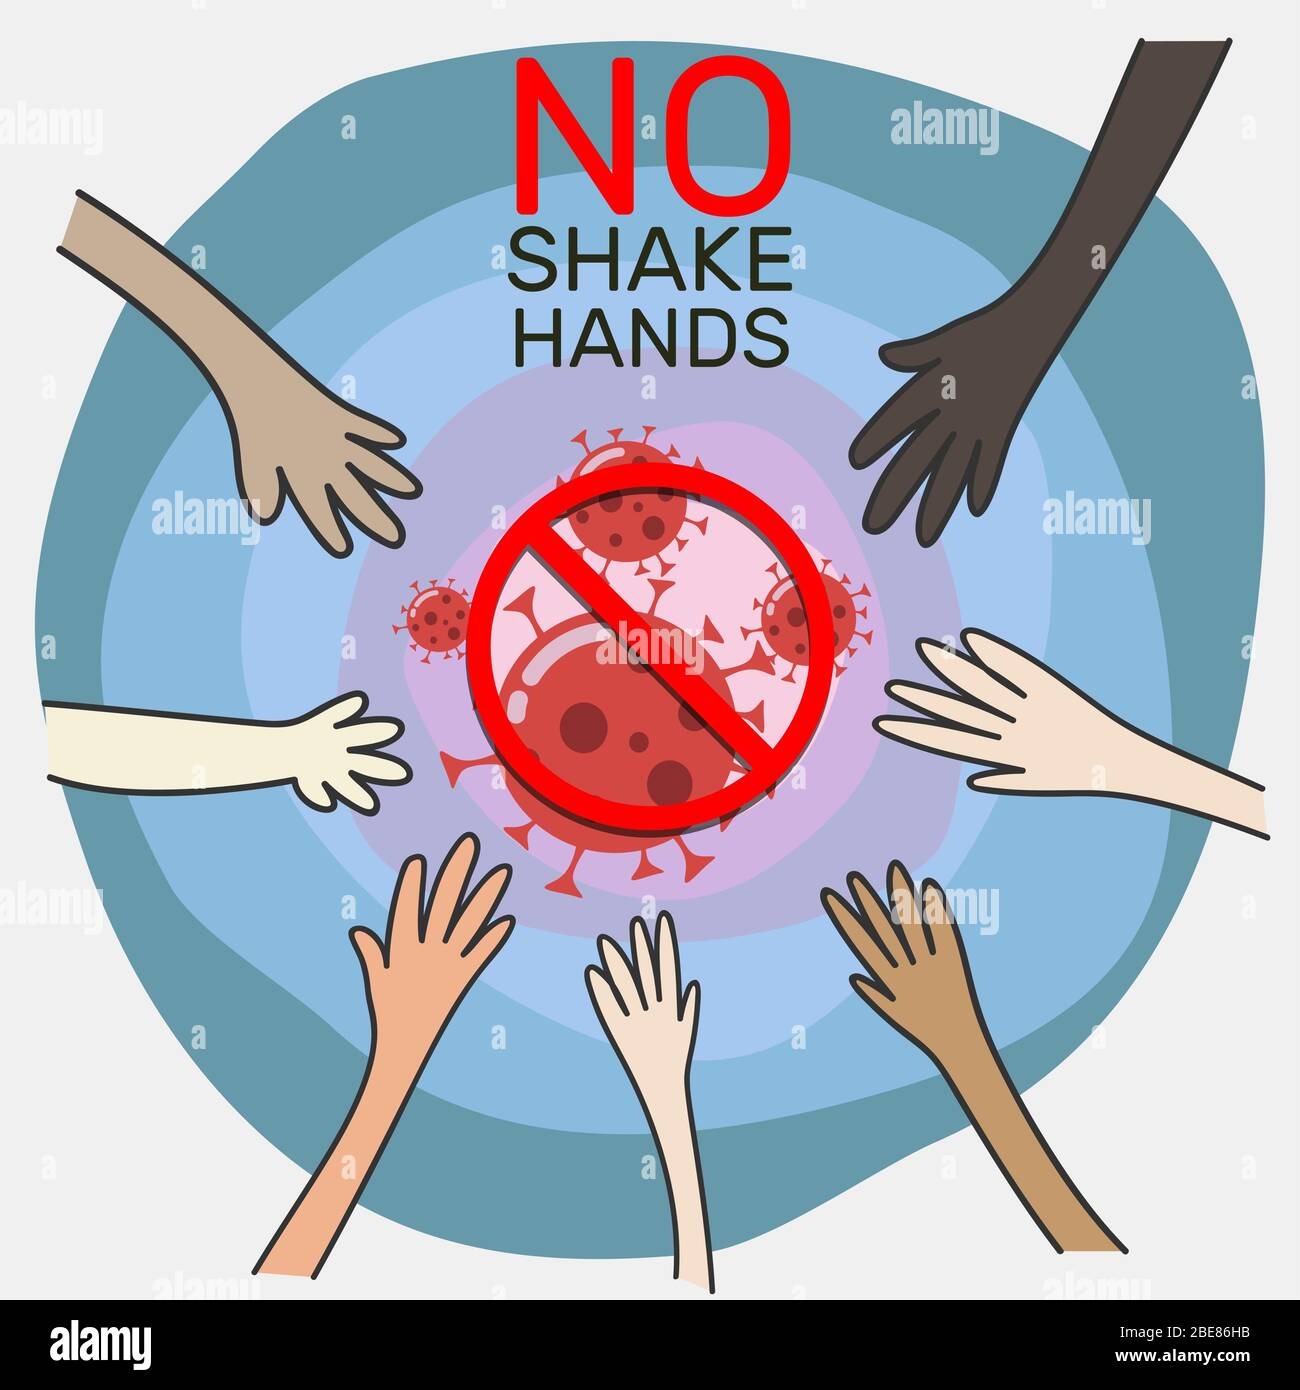 avoid contact, no shake hands, keep spaced between each other for stop COVID-19 virus spreading. social distancing awareness campaign for prevention d Stock Vector